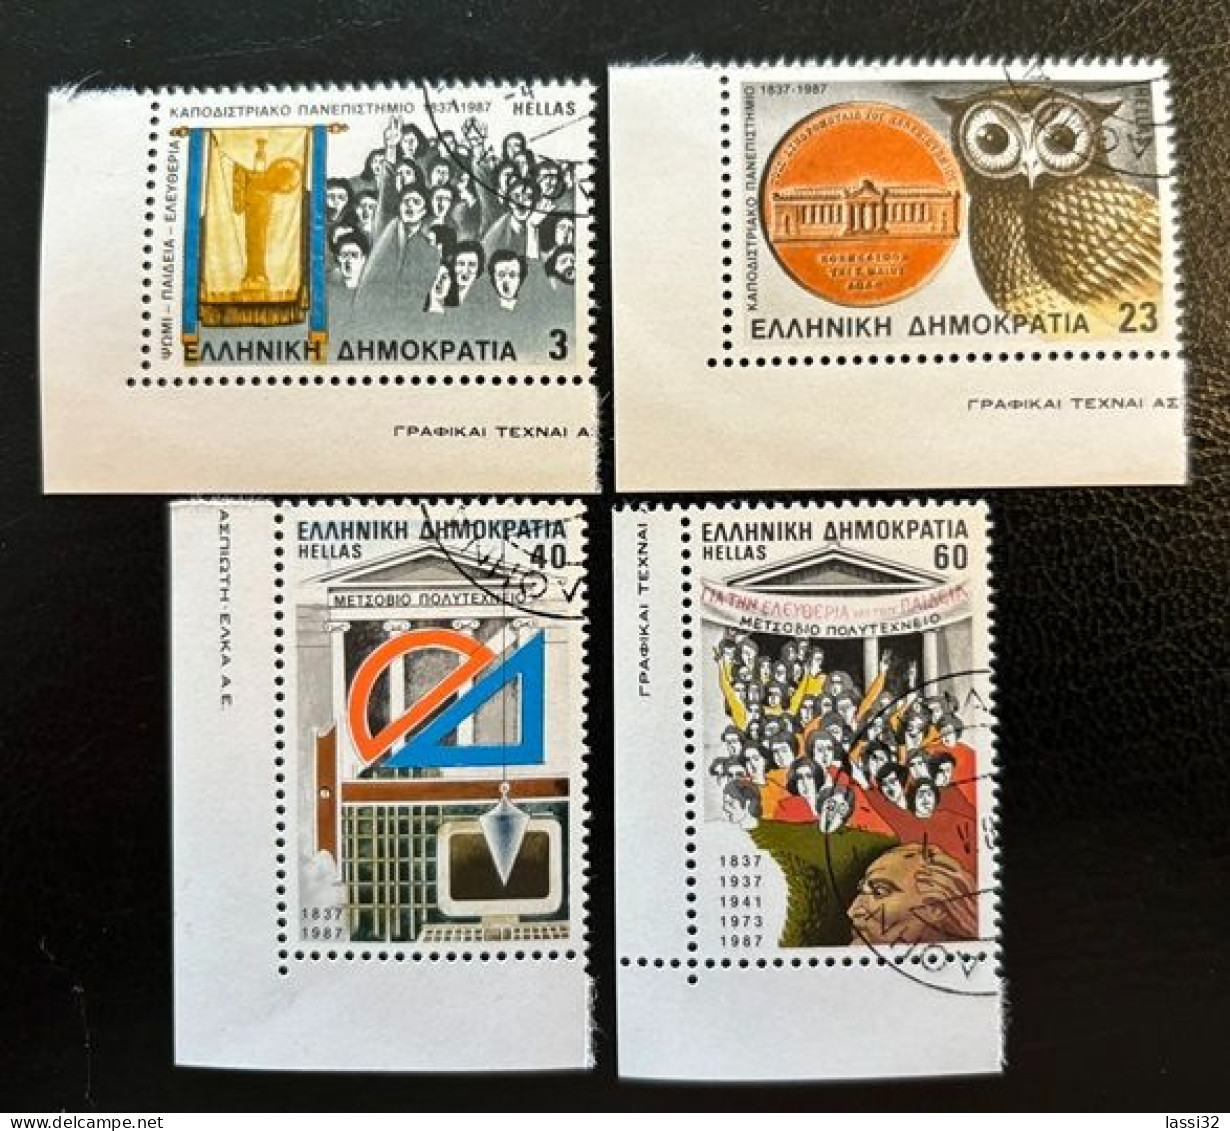 GREECE,1987, HIGHER EDUCATION , USED - Used Stamps